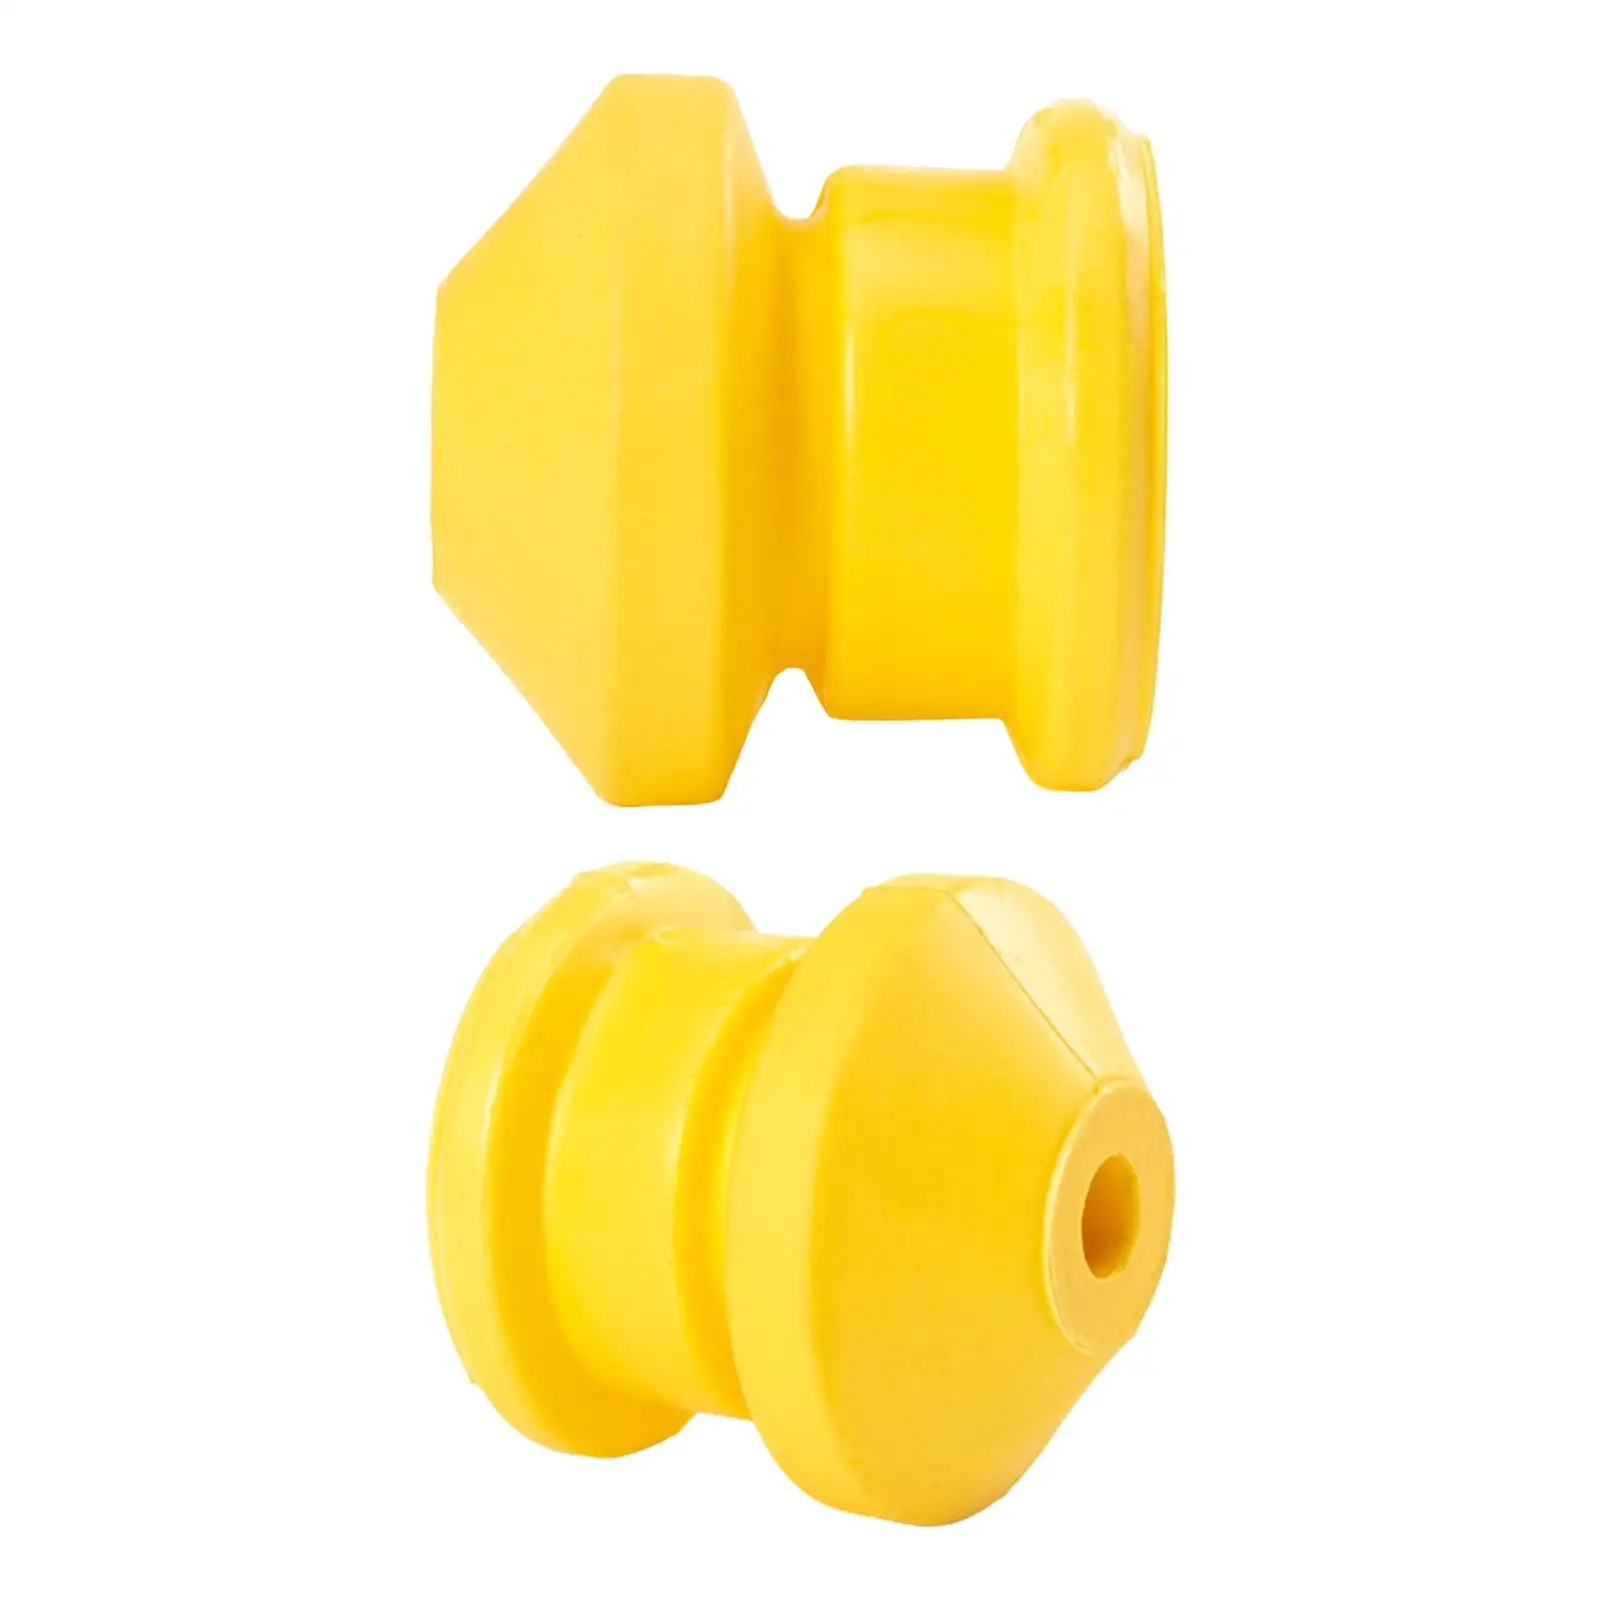 2 Pieces Bumper Stop Absorber 15783030 Durable Car Parts Direct Replaces Rubber Bump Suspension for Hummer H3T 2009-2010